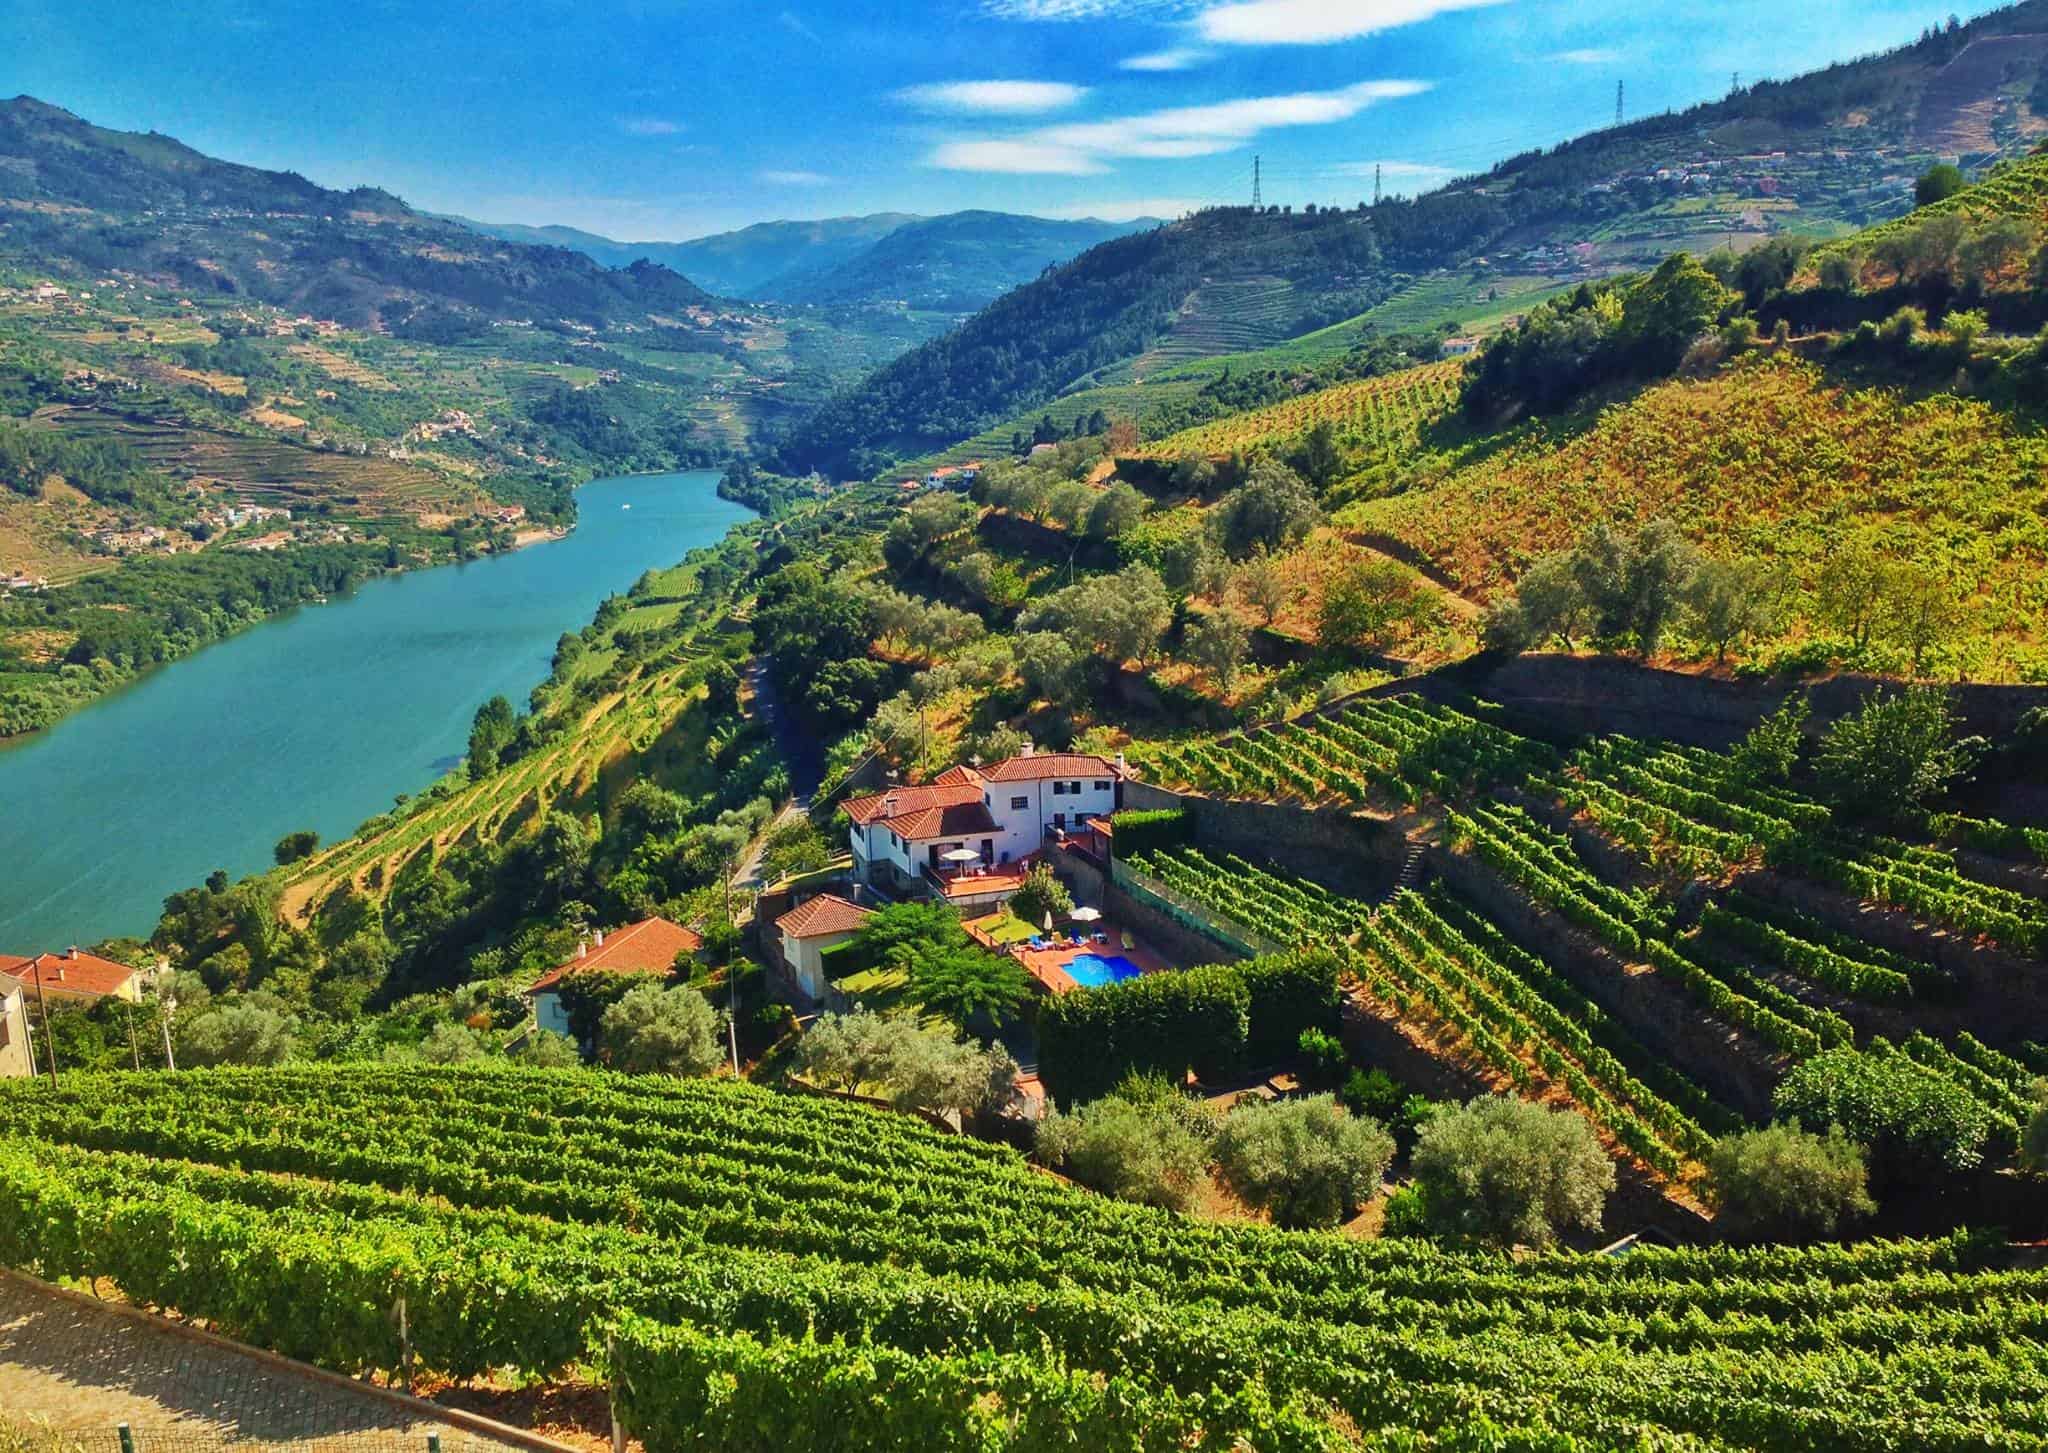 The Douro Valley, in Portugal